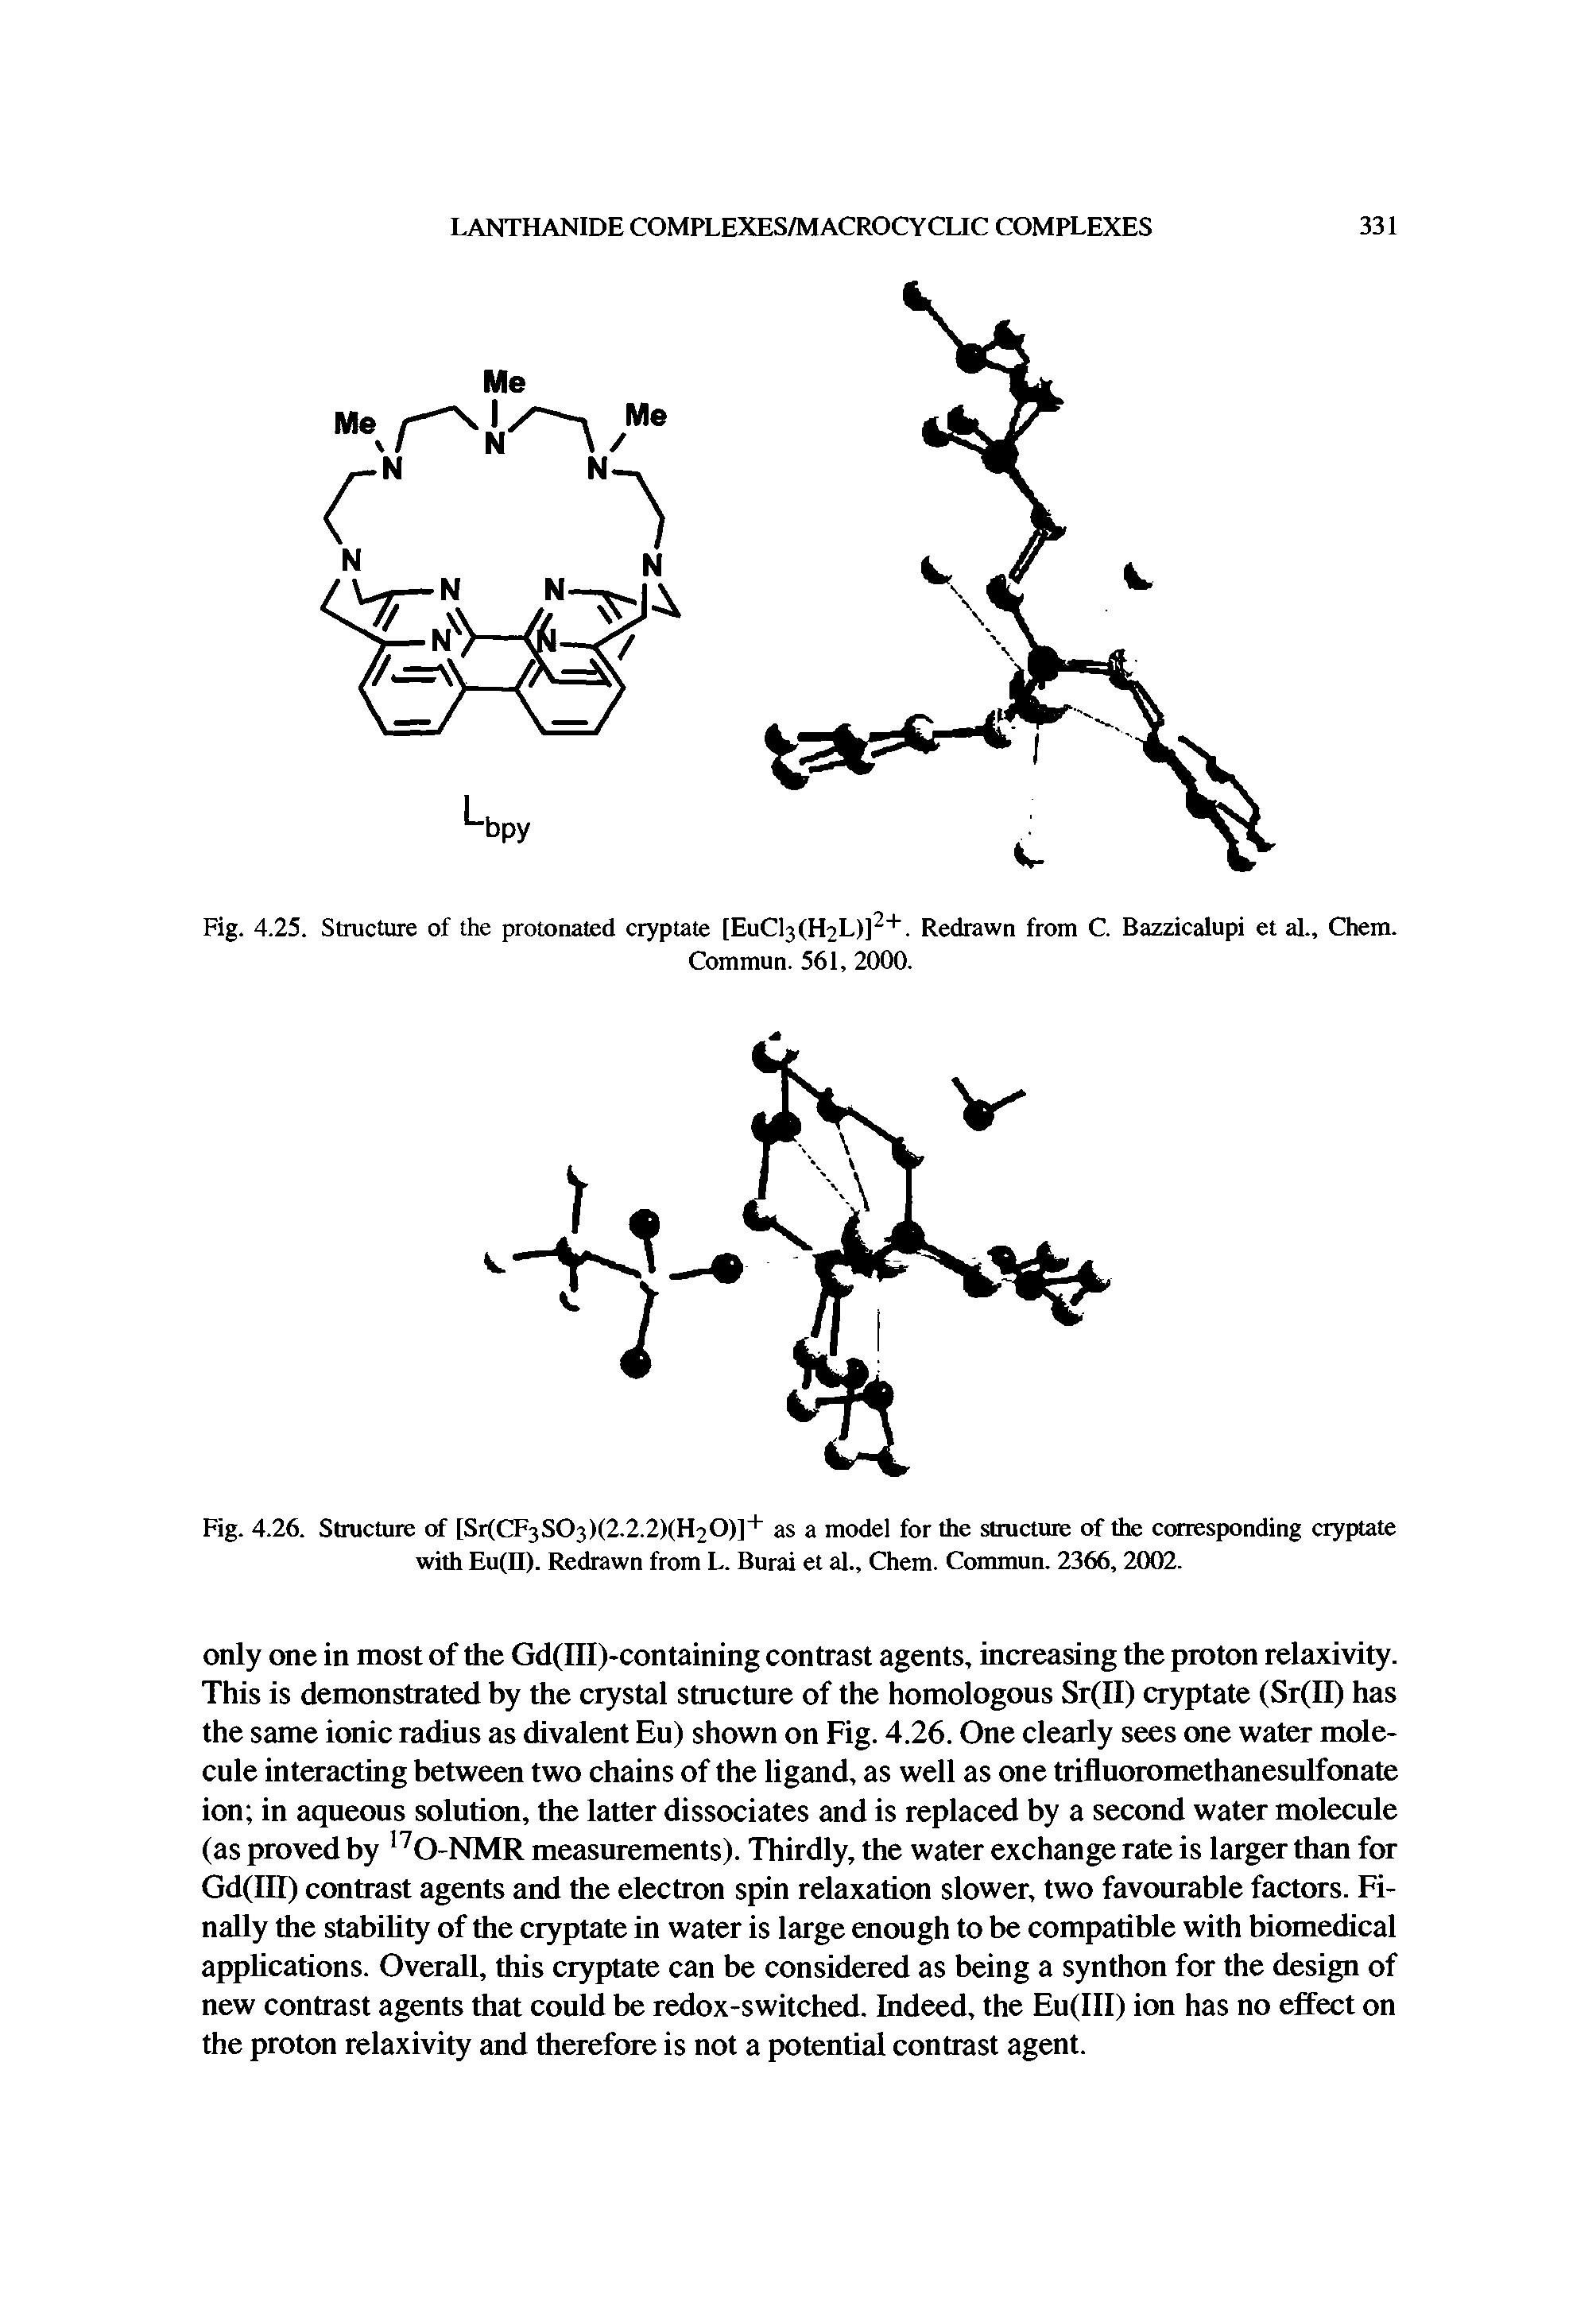 Fig. 4.25. Structure of the protonated cryptate [EuCl3(H2L)]2+. Redrawn from C. Bazzicalupi et al., Chem.